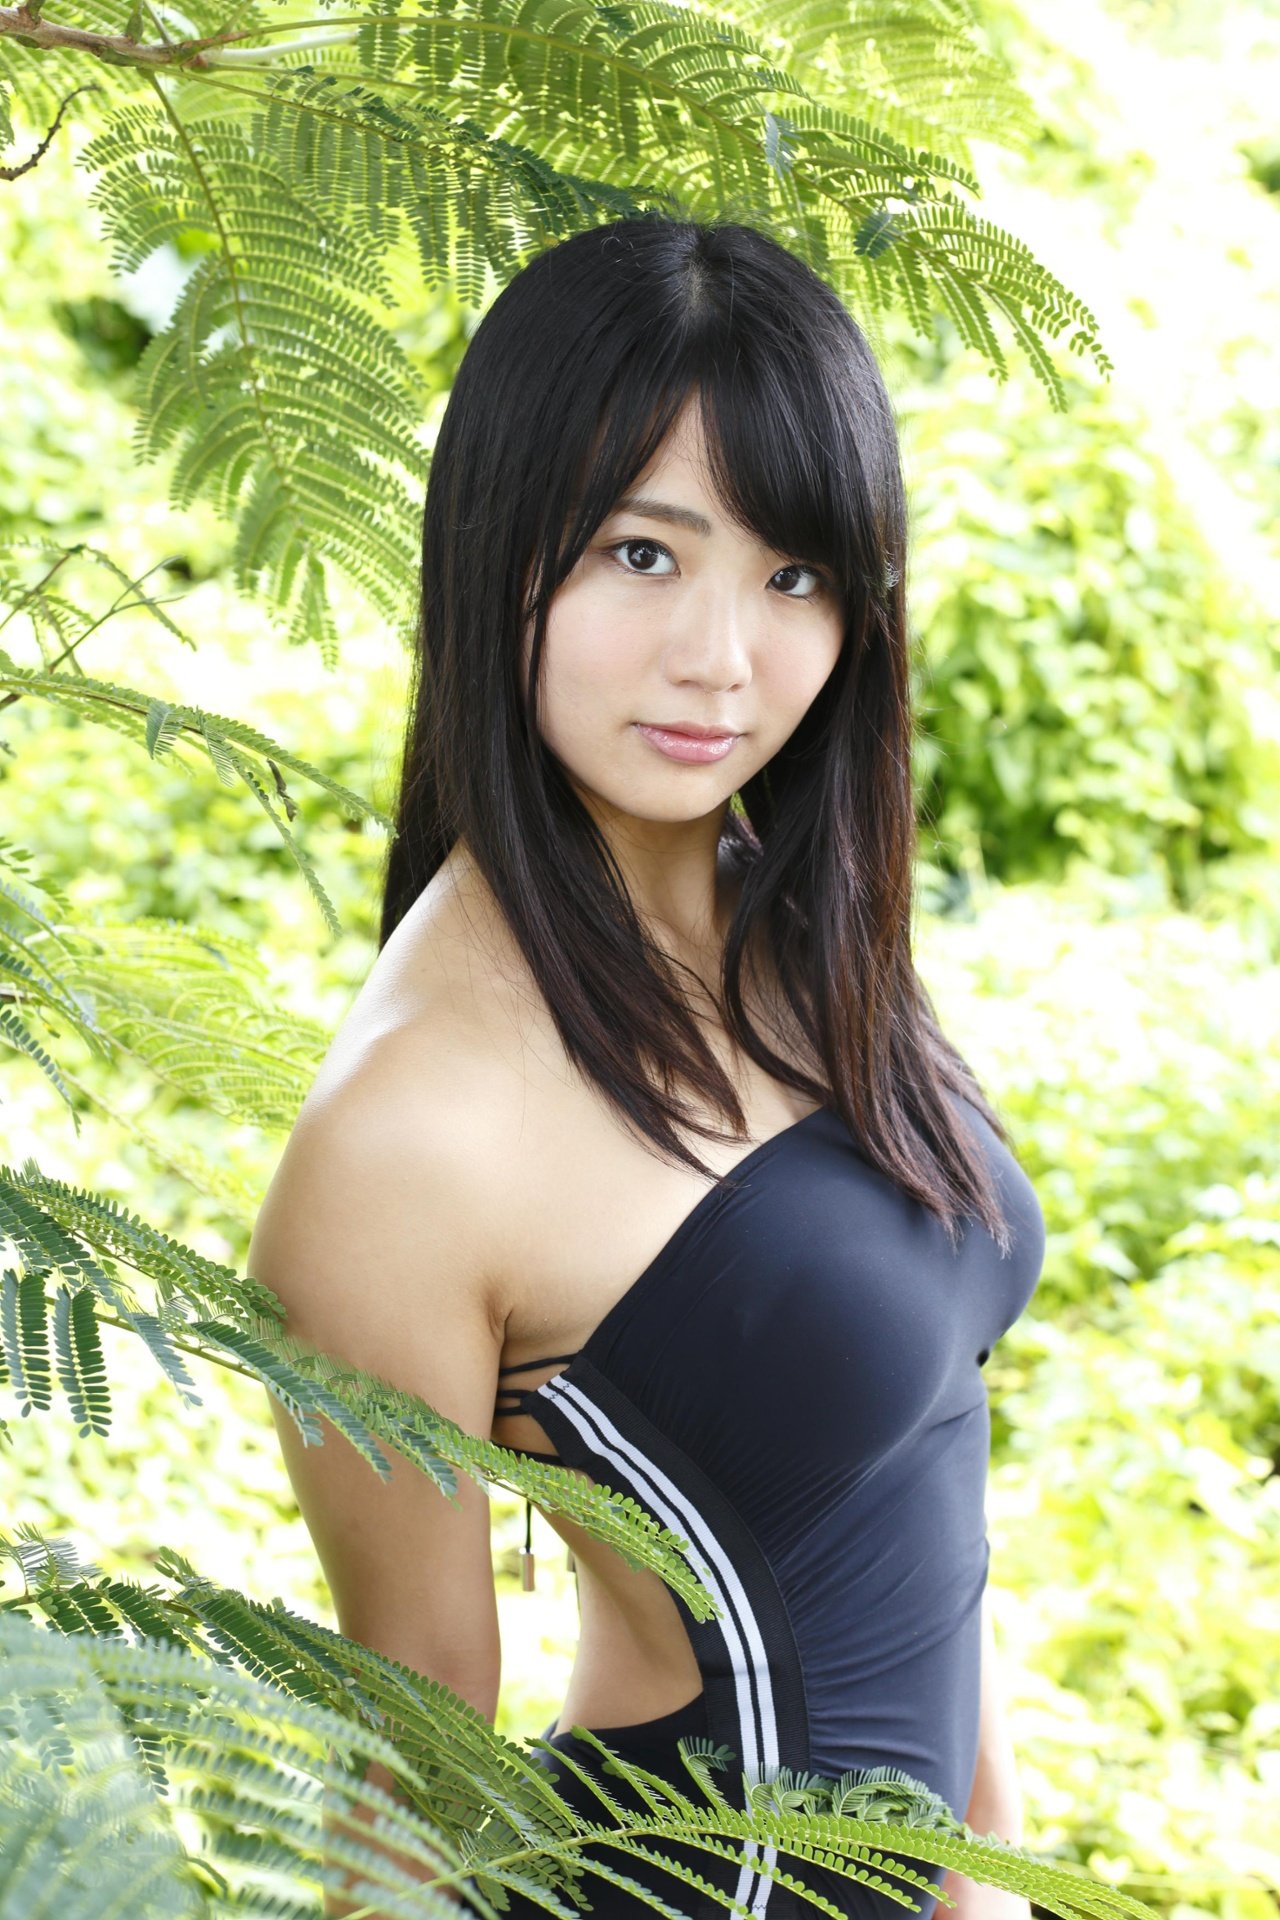 Natsumi Hirajima Lovely Lovely Picture and Photo